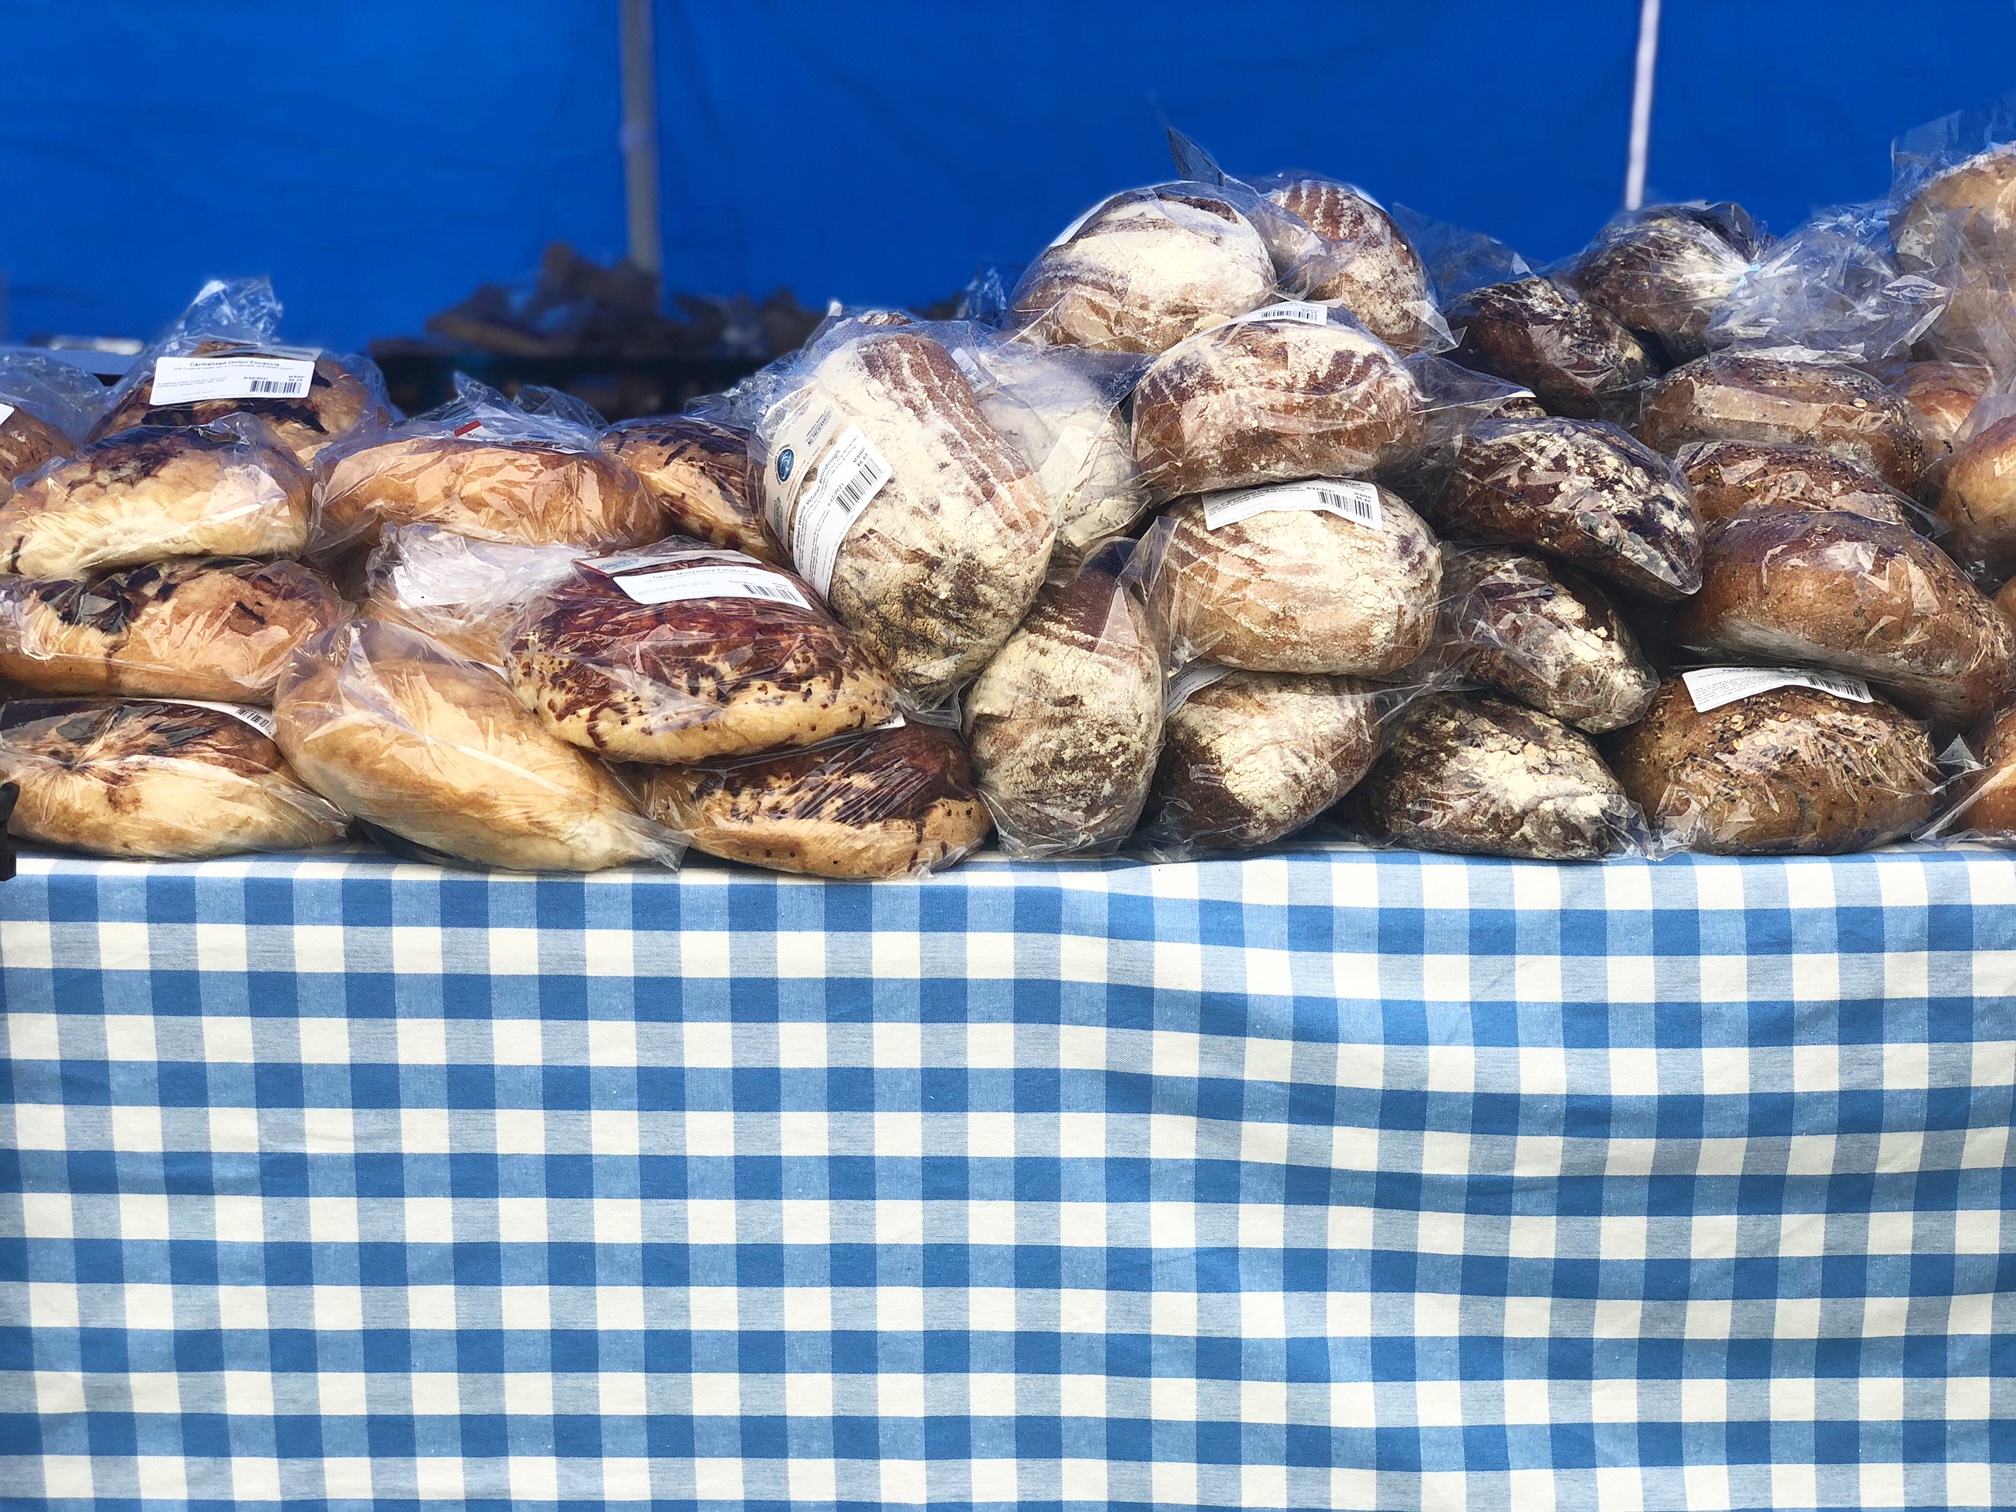 On a table with white and blue checkered tablecloth, there are several varieties of bread wrapped in plastic. Photo by Alyssa Buckley.